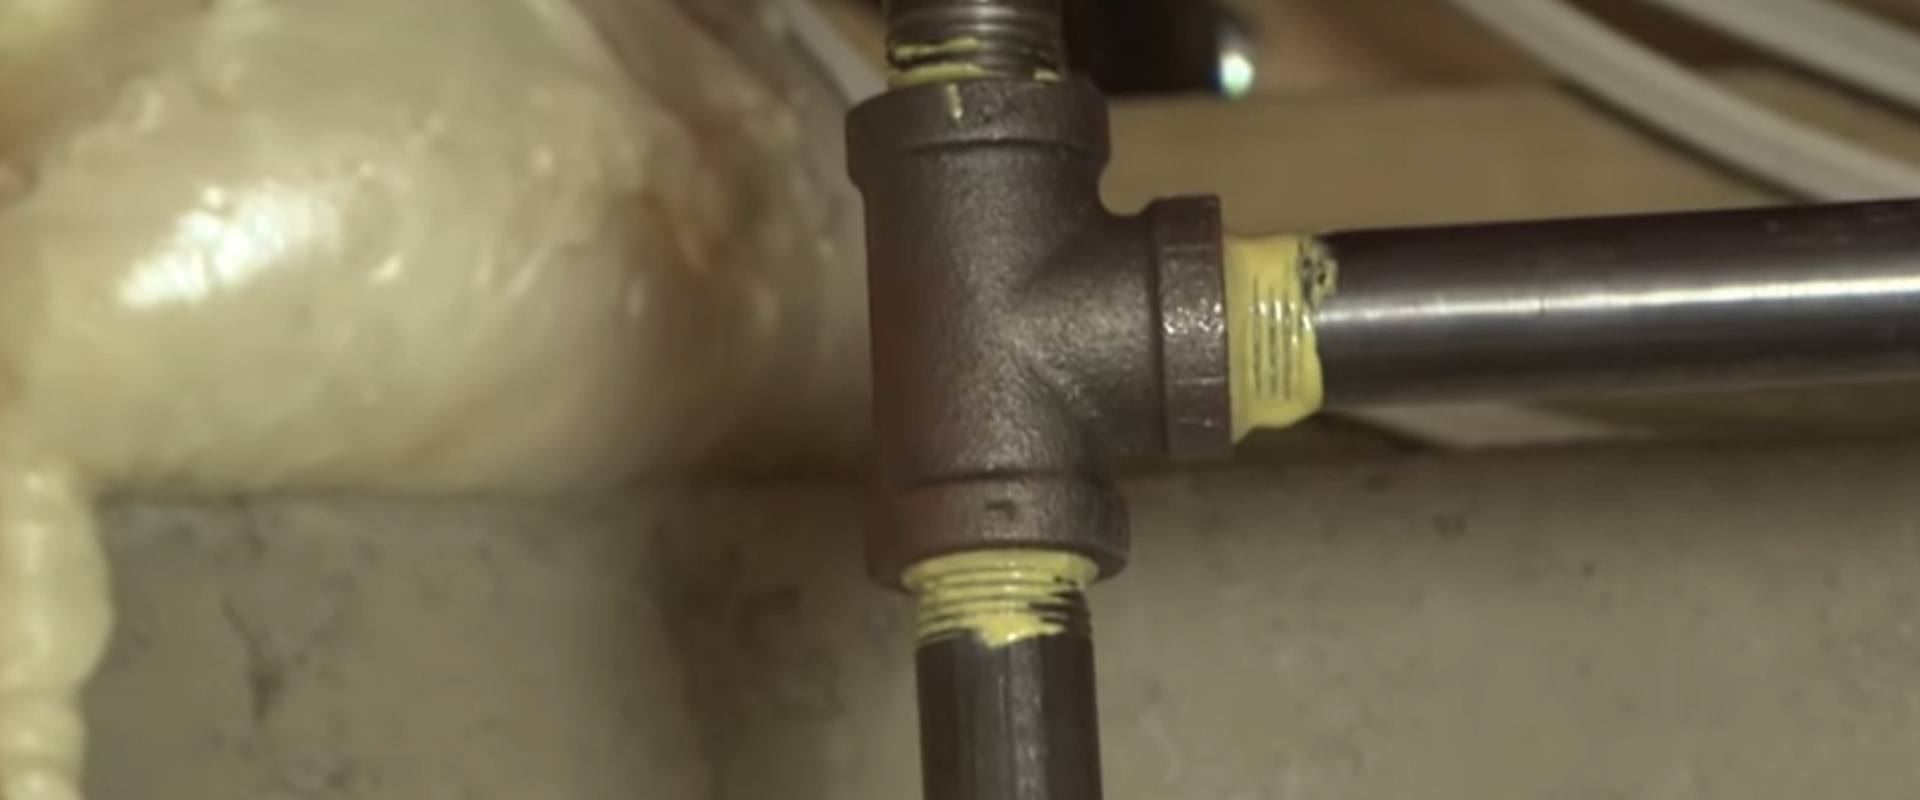 Does natural gas get into your house through pipes?